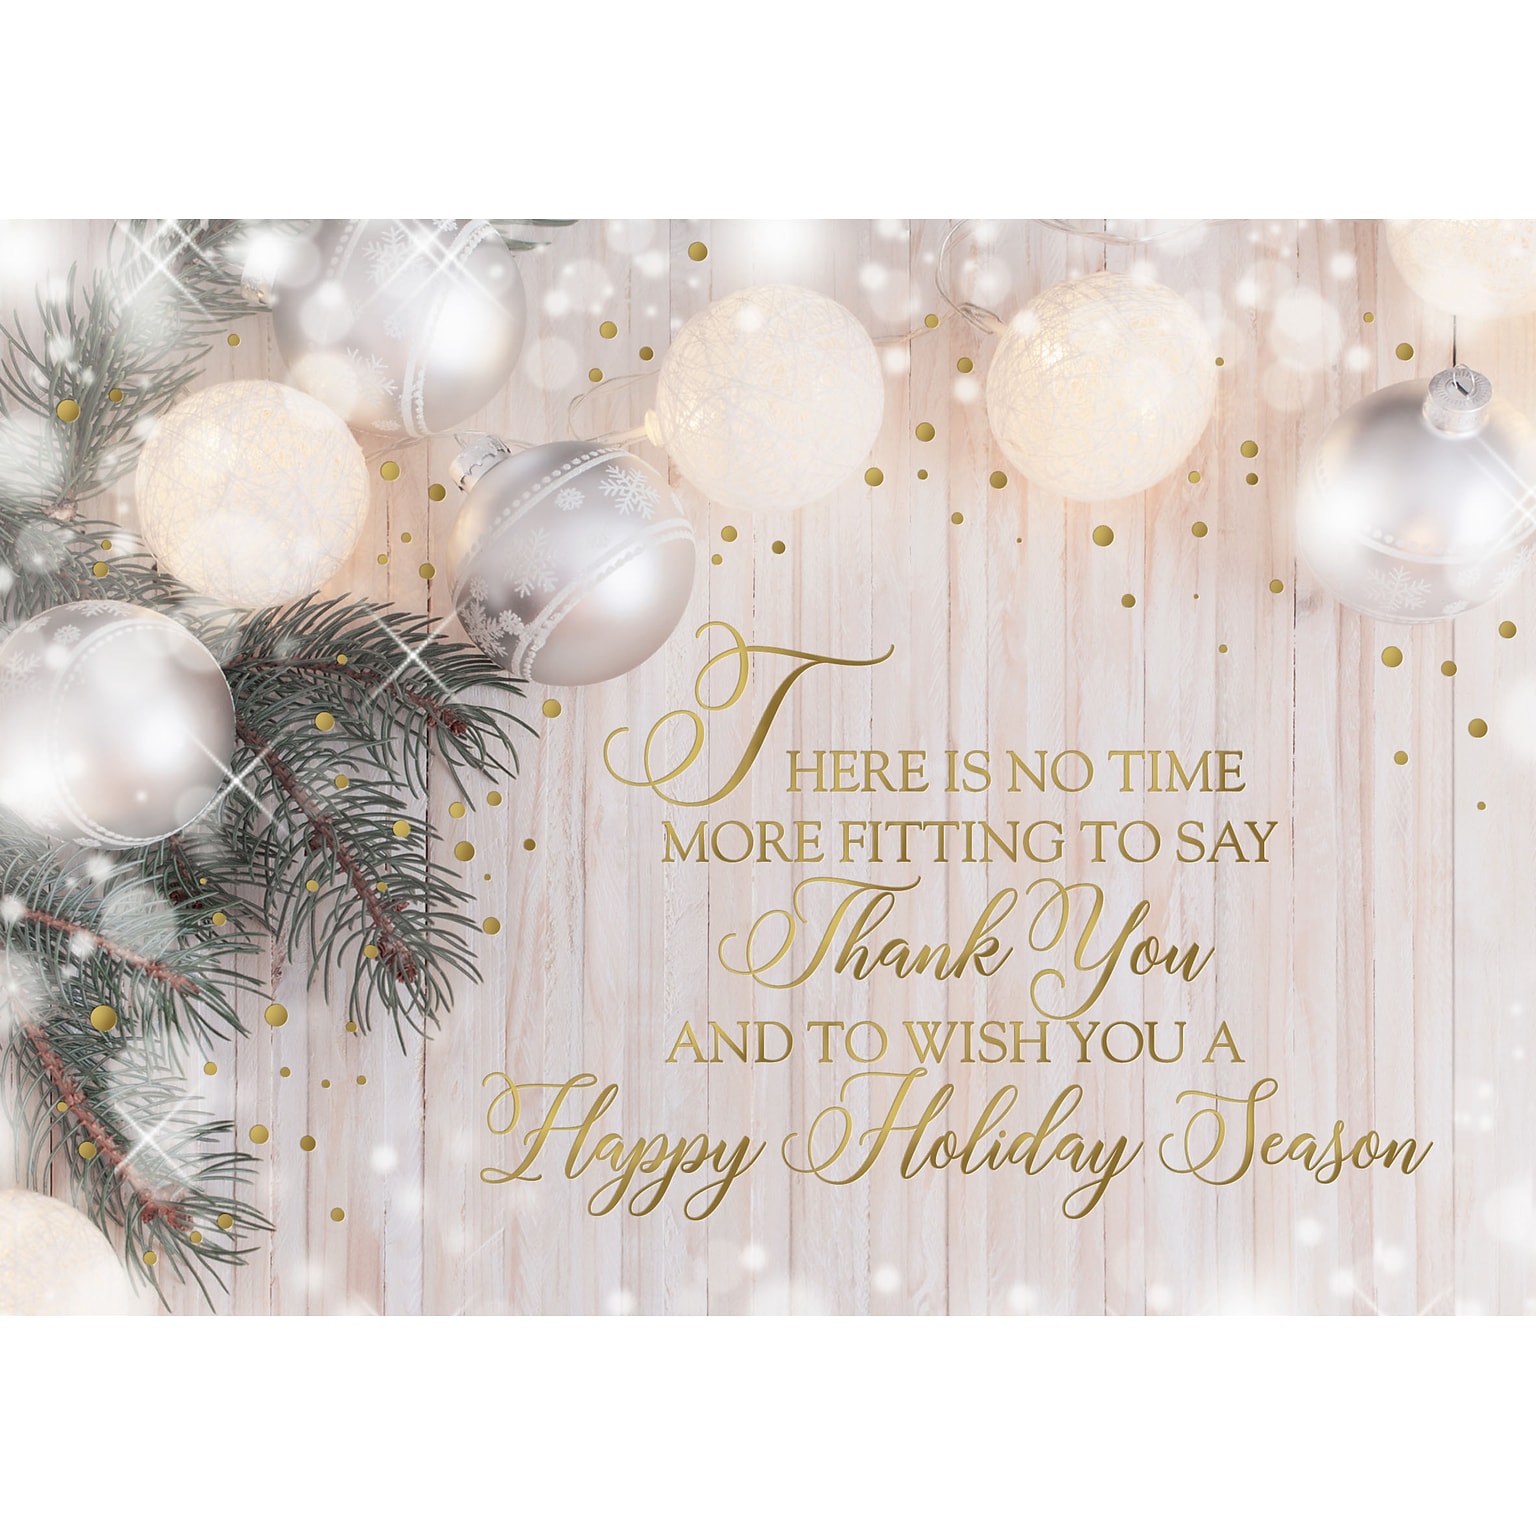 Custom Thank You Holiday Season Pearl Ornaments Cards, with Envelopes, 7-7/8 x 5-5/8, 25 Cards per Set